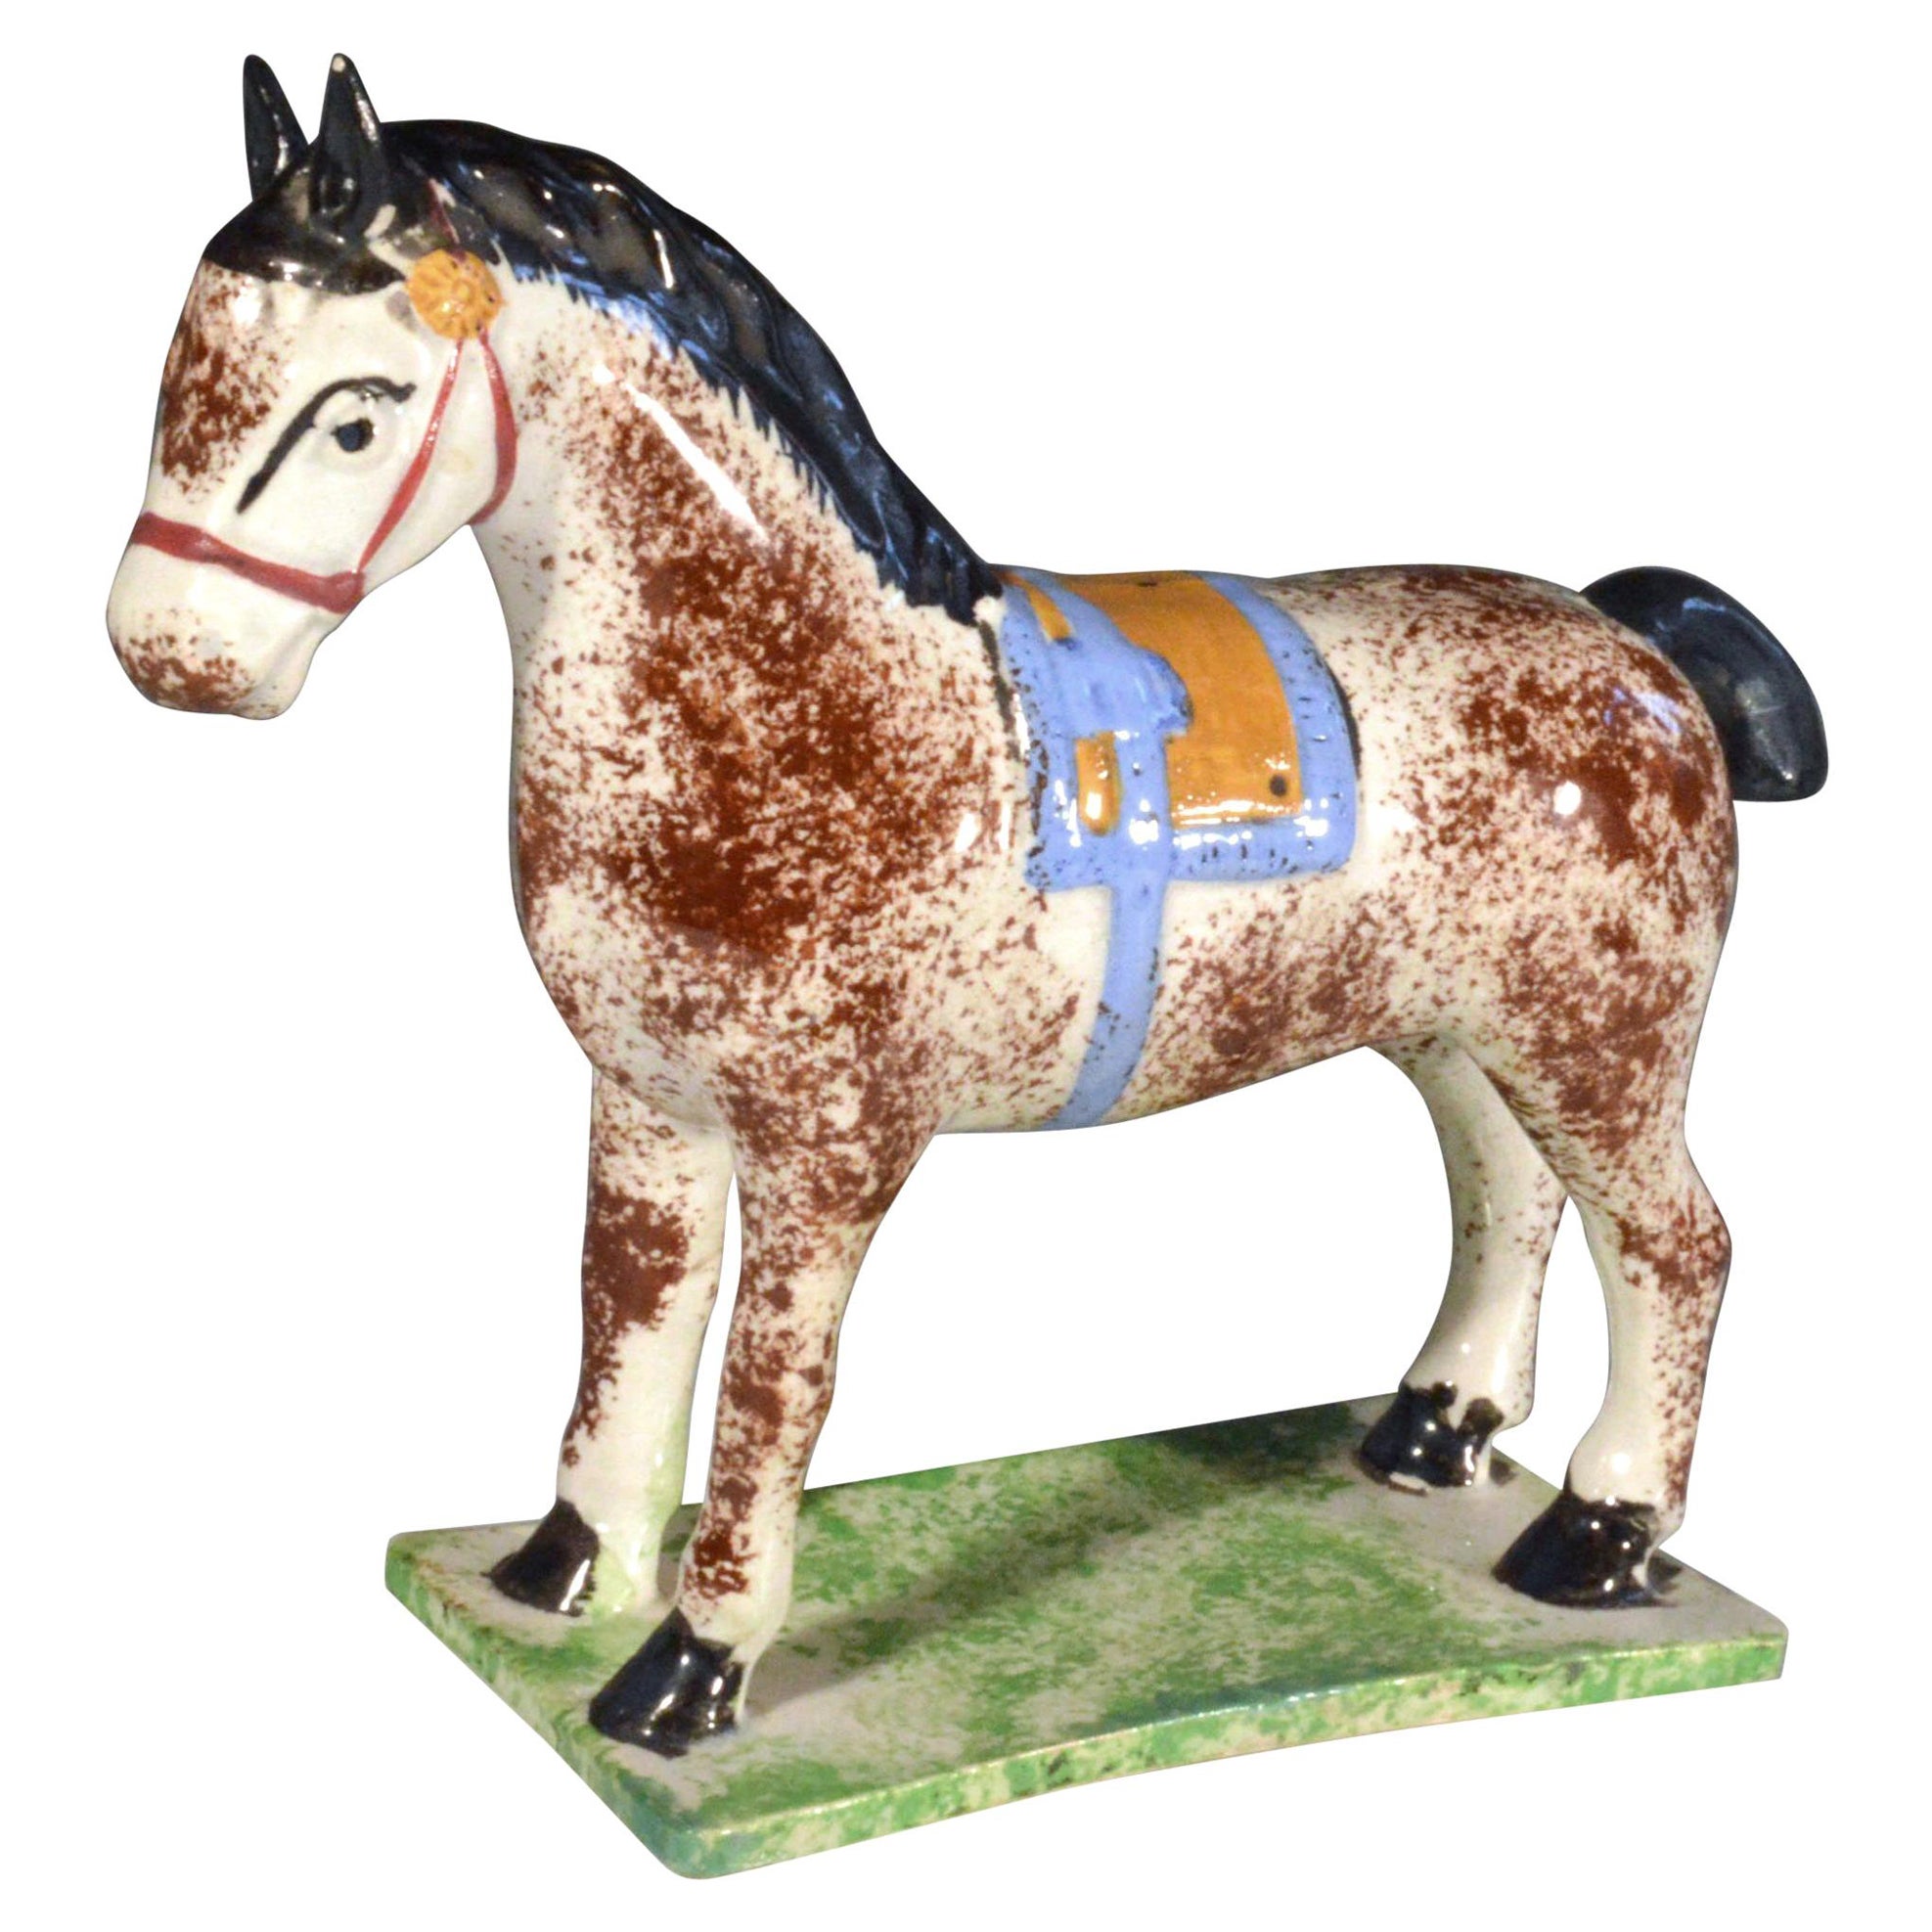 Newcastle Prattware Pottery Horse, Attributed to St. Anthony Pottery